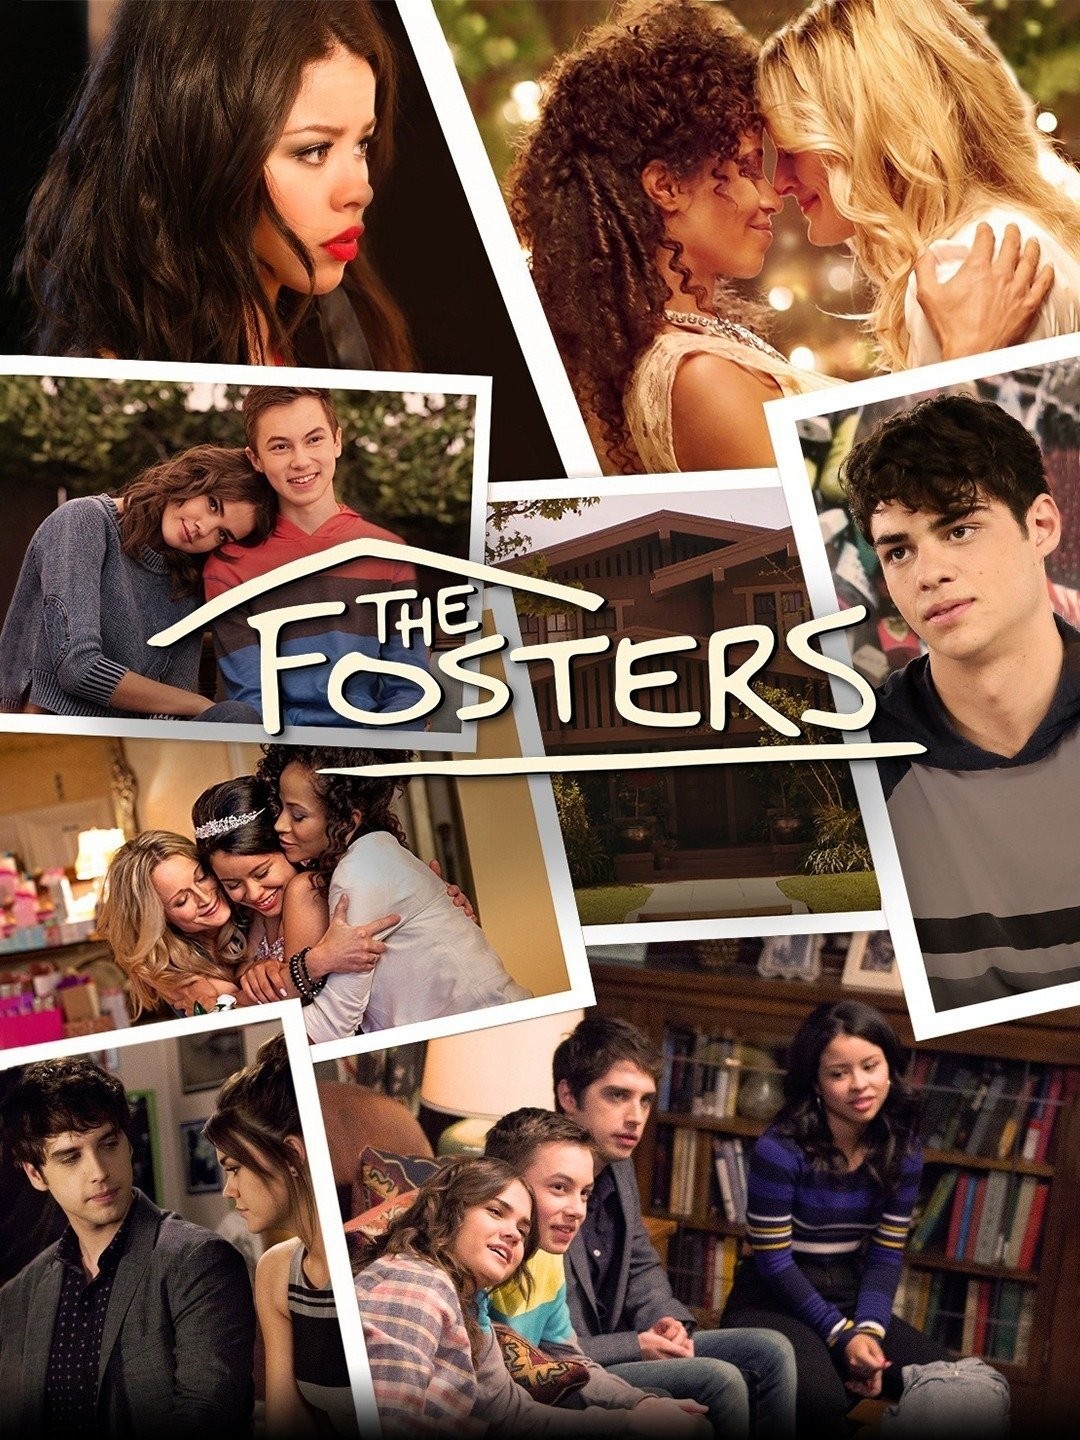 The fosters age rating